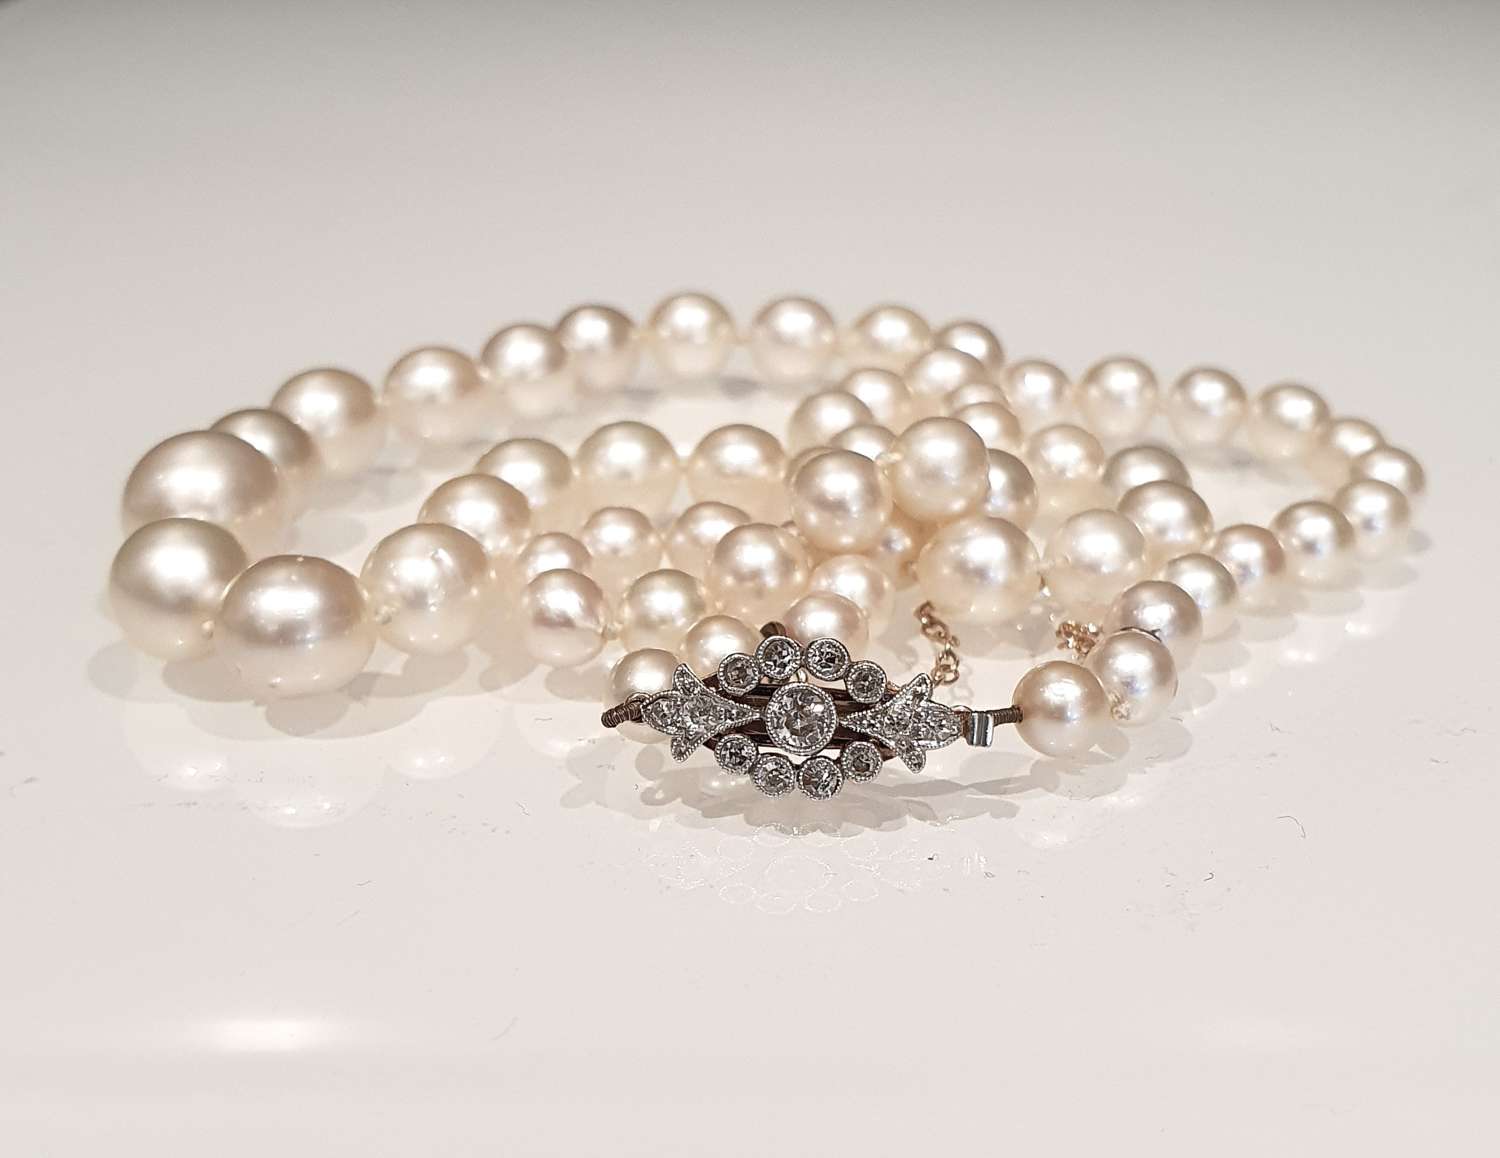 Akoya cultured pearl necklace